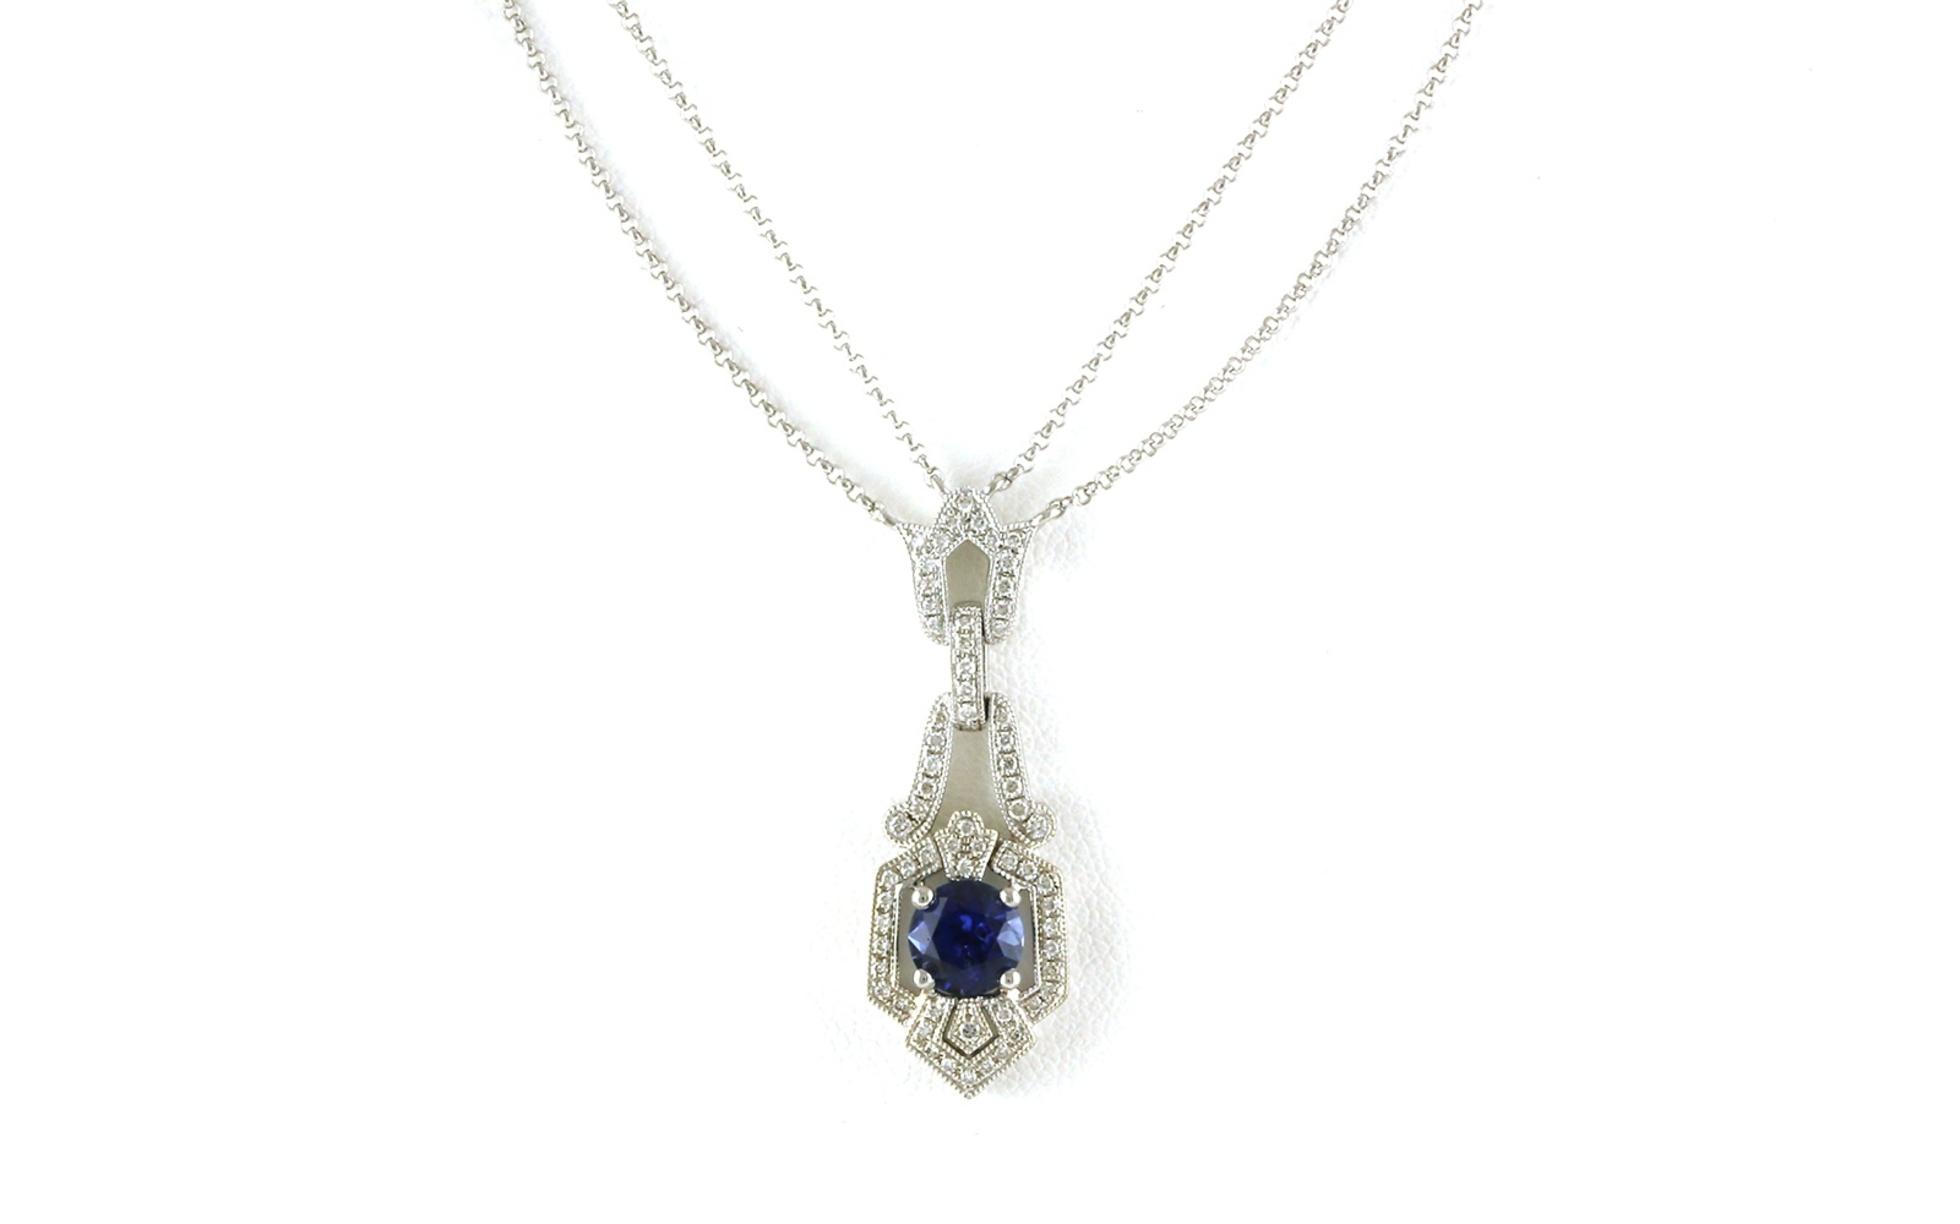 Vintage-style Drop Halo Montana Yogo Sapphire and Diamond Necklace on Double Strand Chain in White Gold (1.36cts TWT)